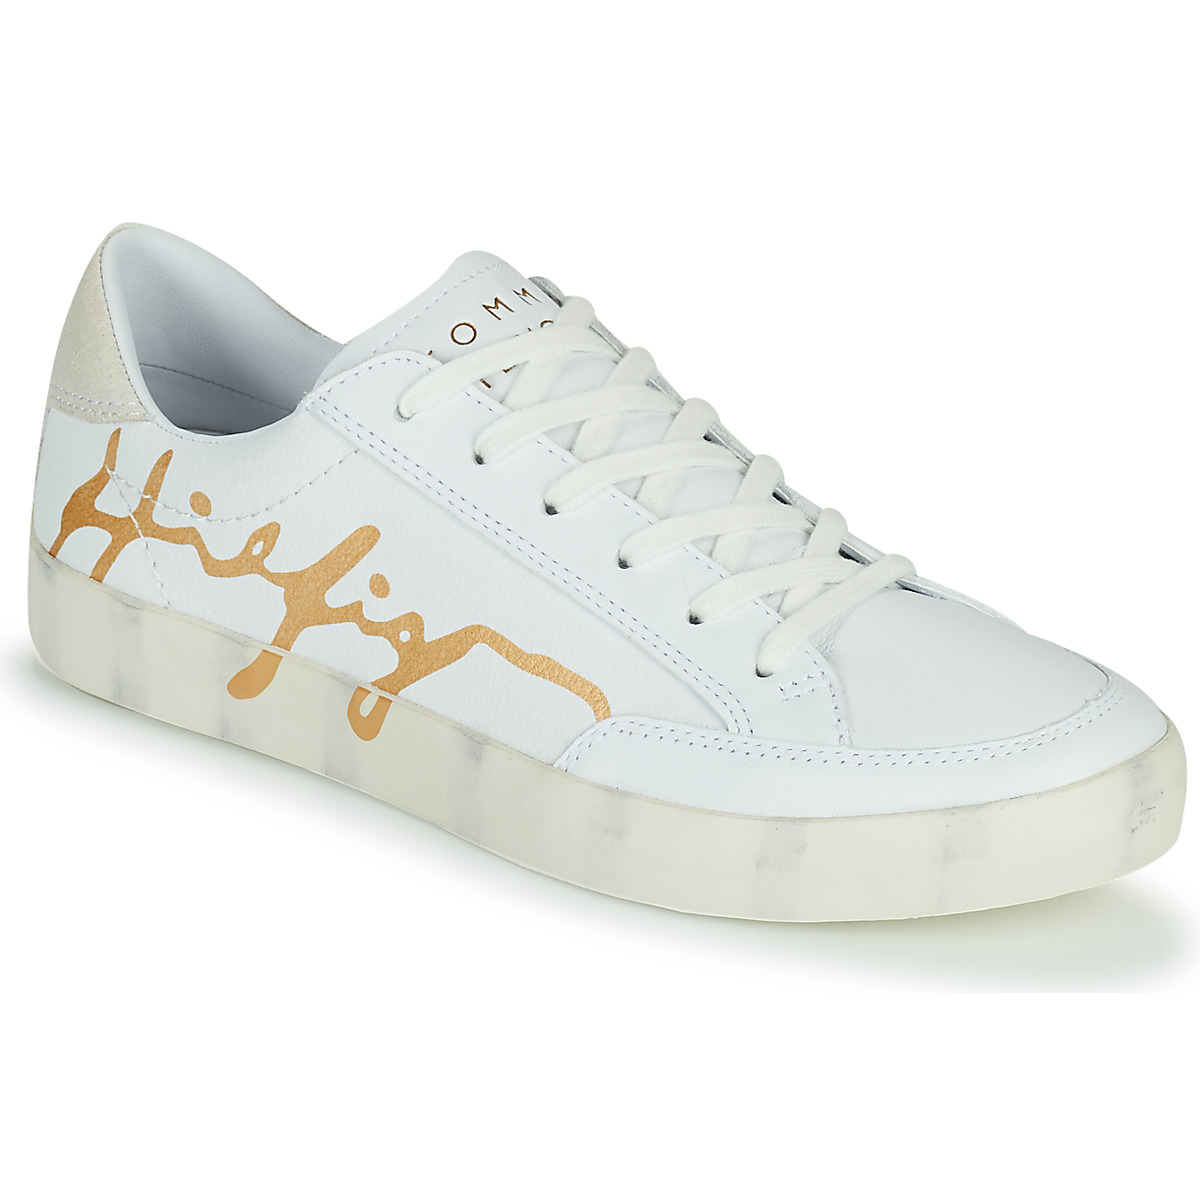 Chaussures Femme Tommy Hilfiger Sport logo tape on cuffs TH SIGNATURE LEATHER SNEAKER Blanc